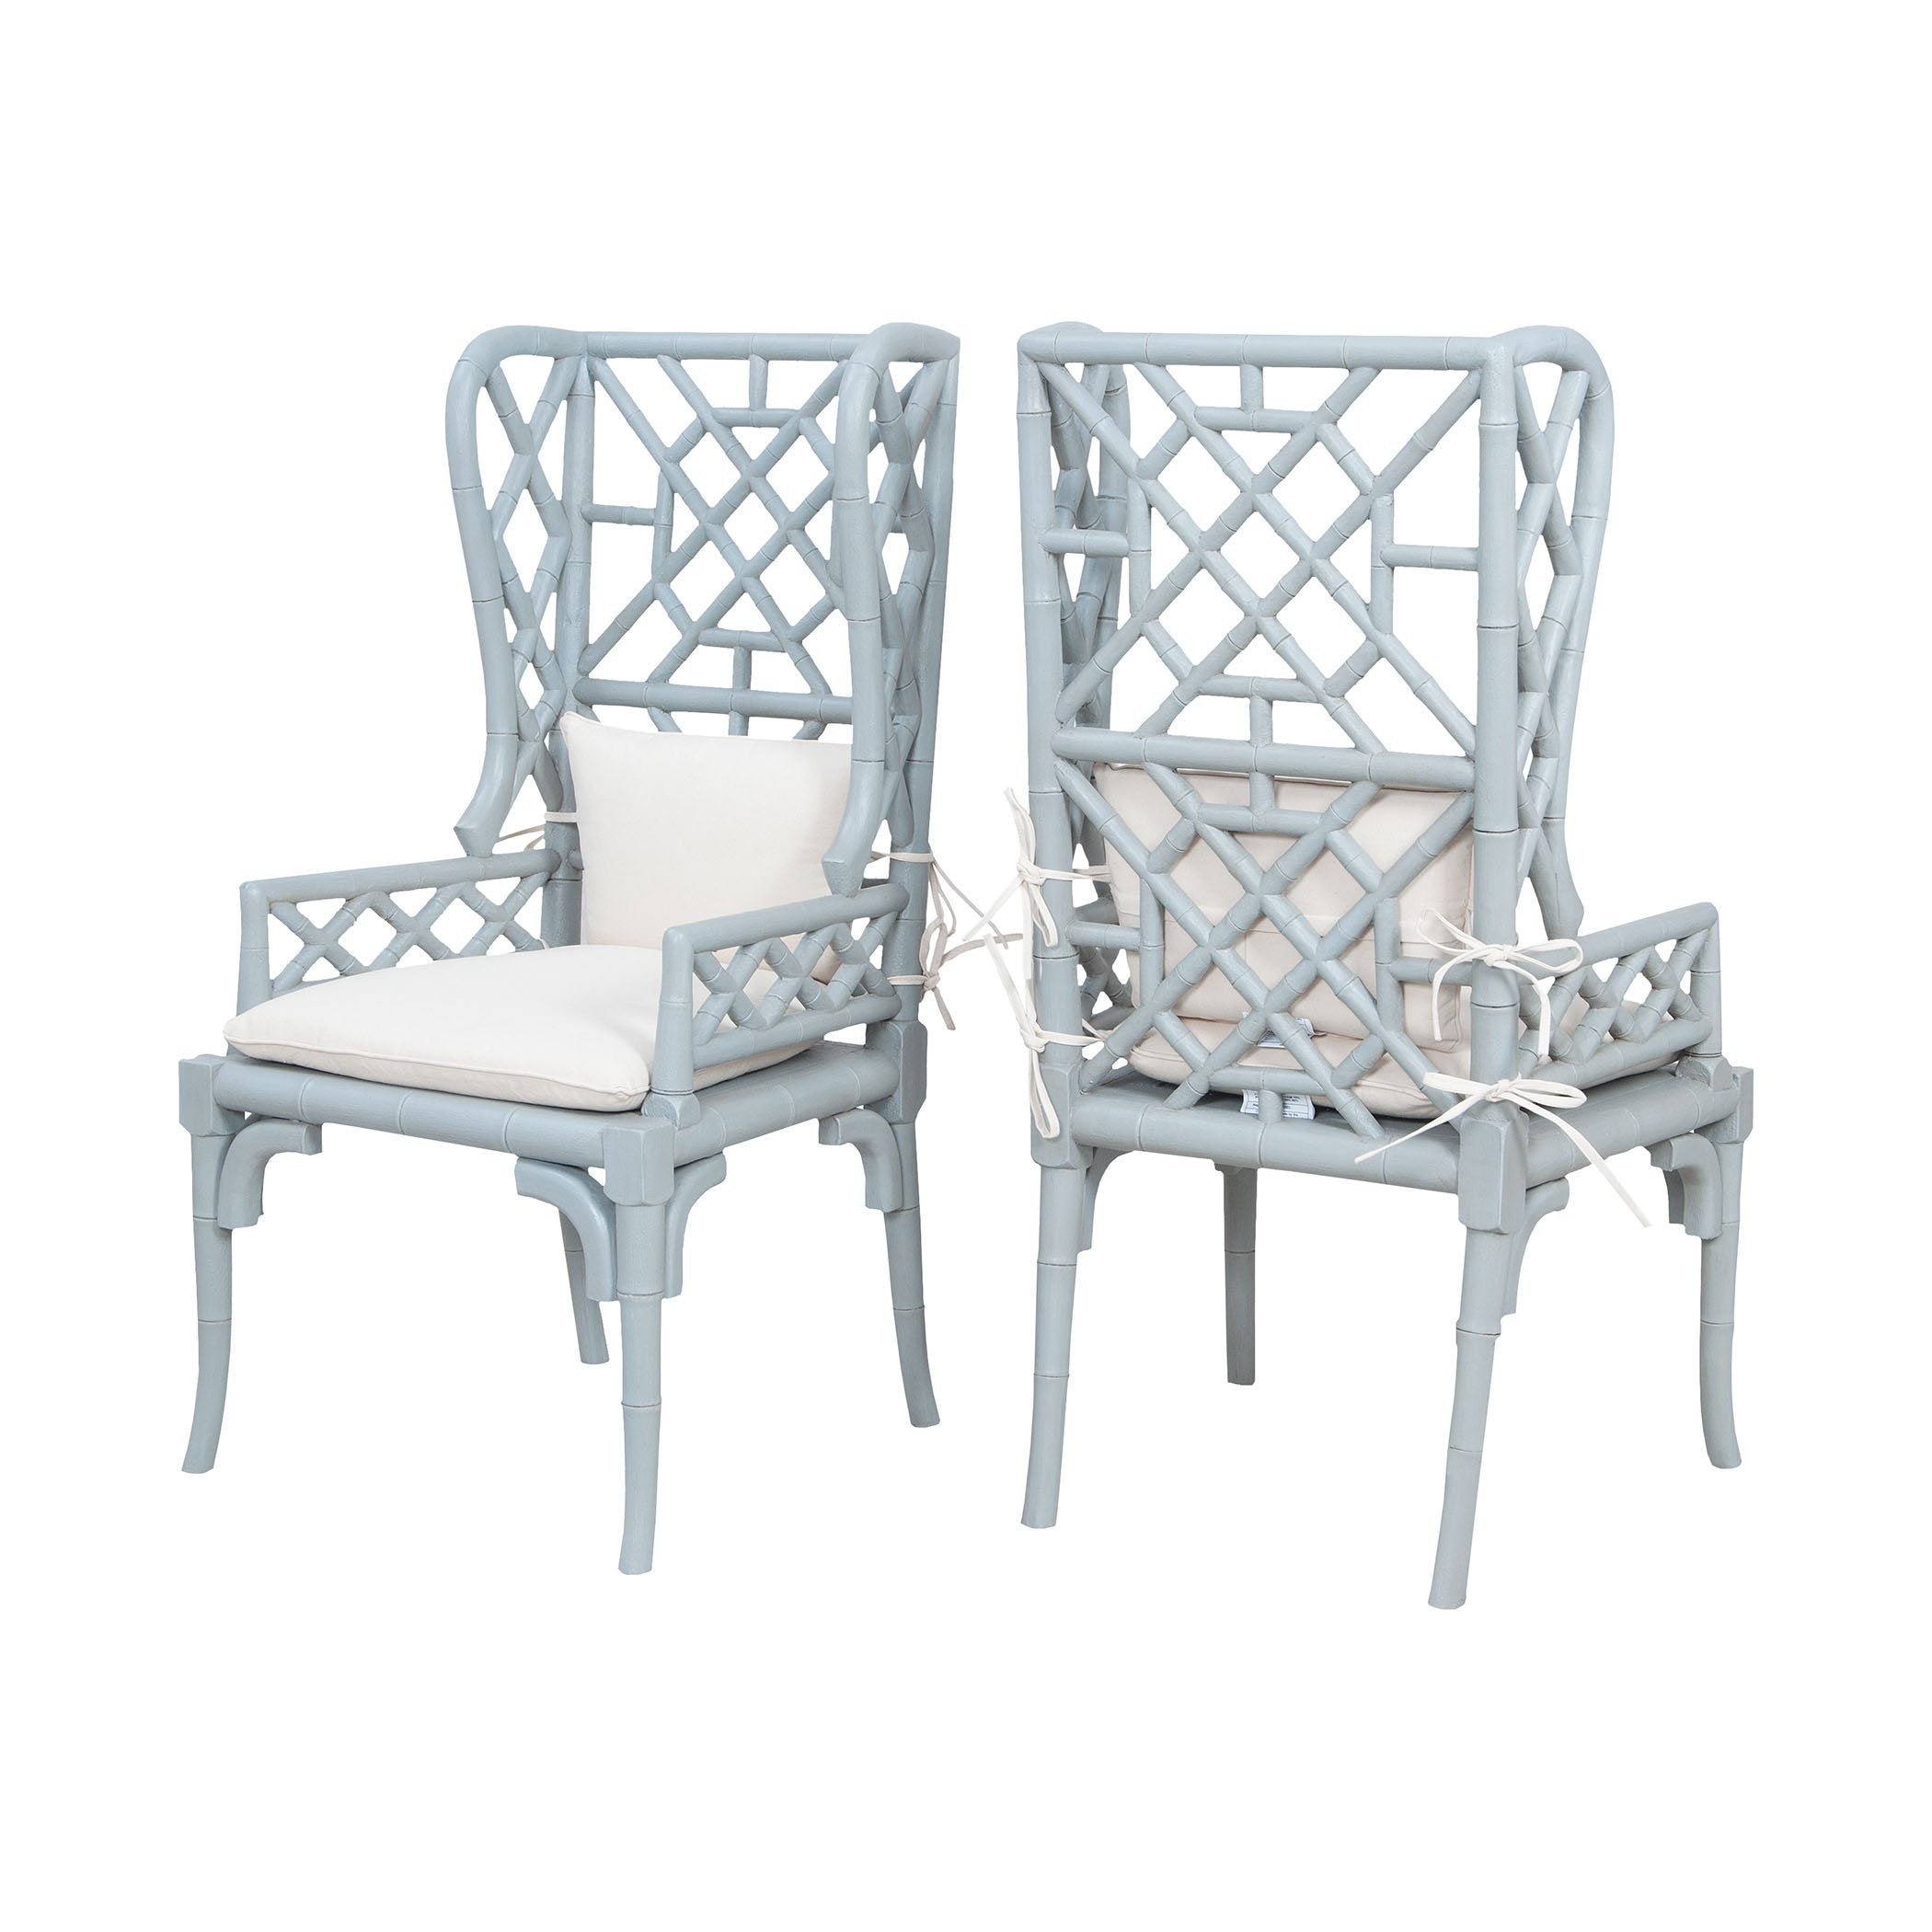 Bamboo Wing Back Chairs In Manor Slate - Set of 2 Furniture GuildMaster 